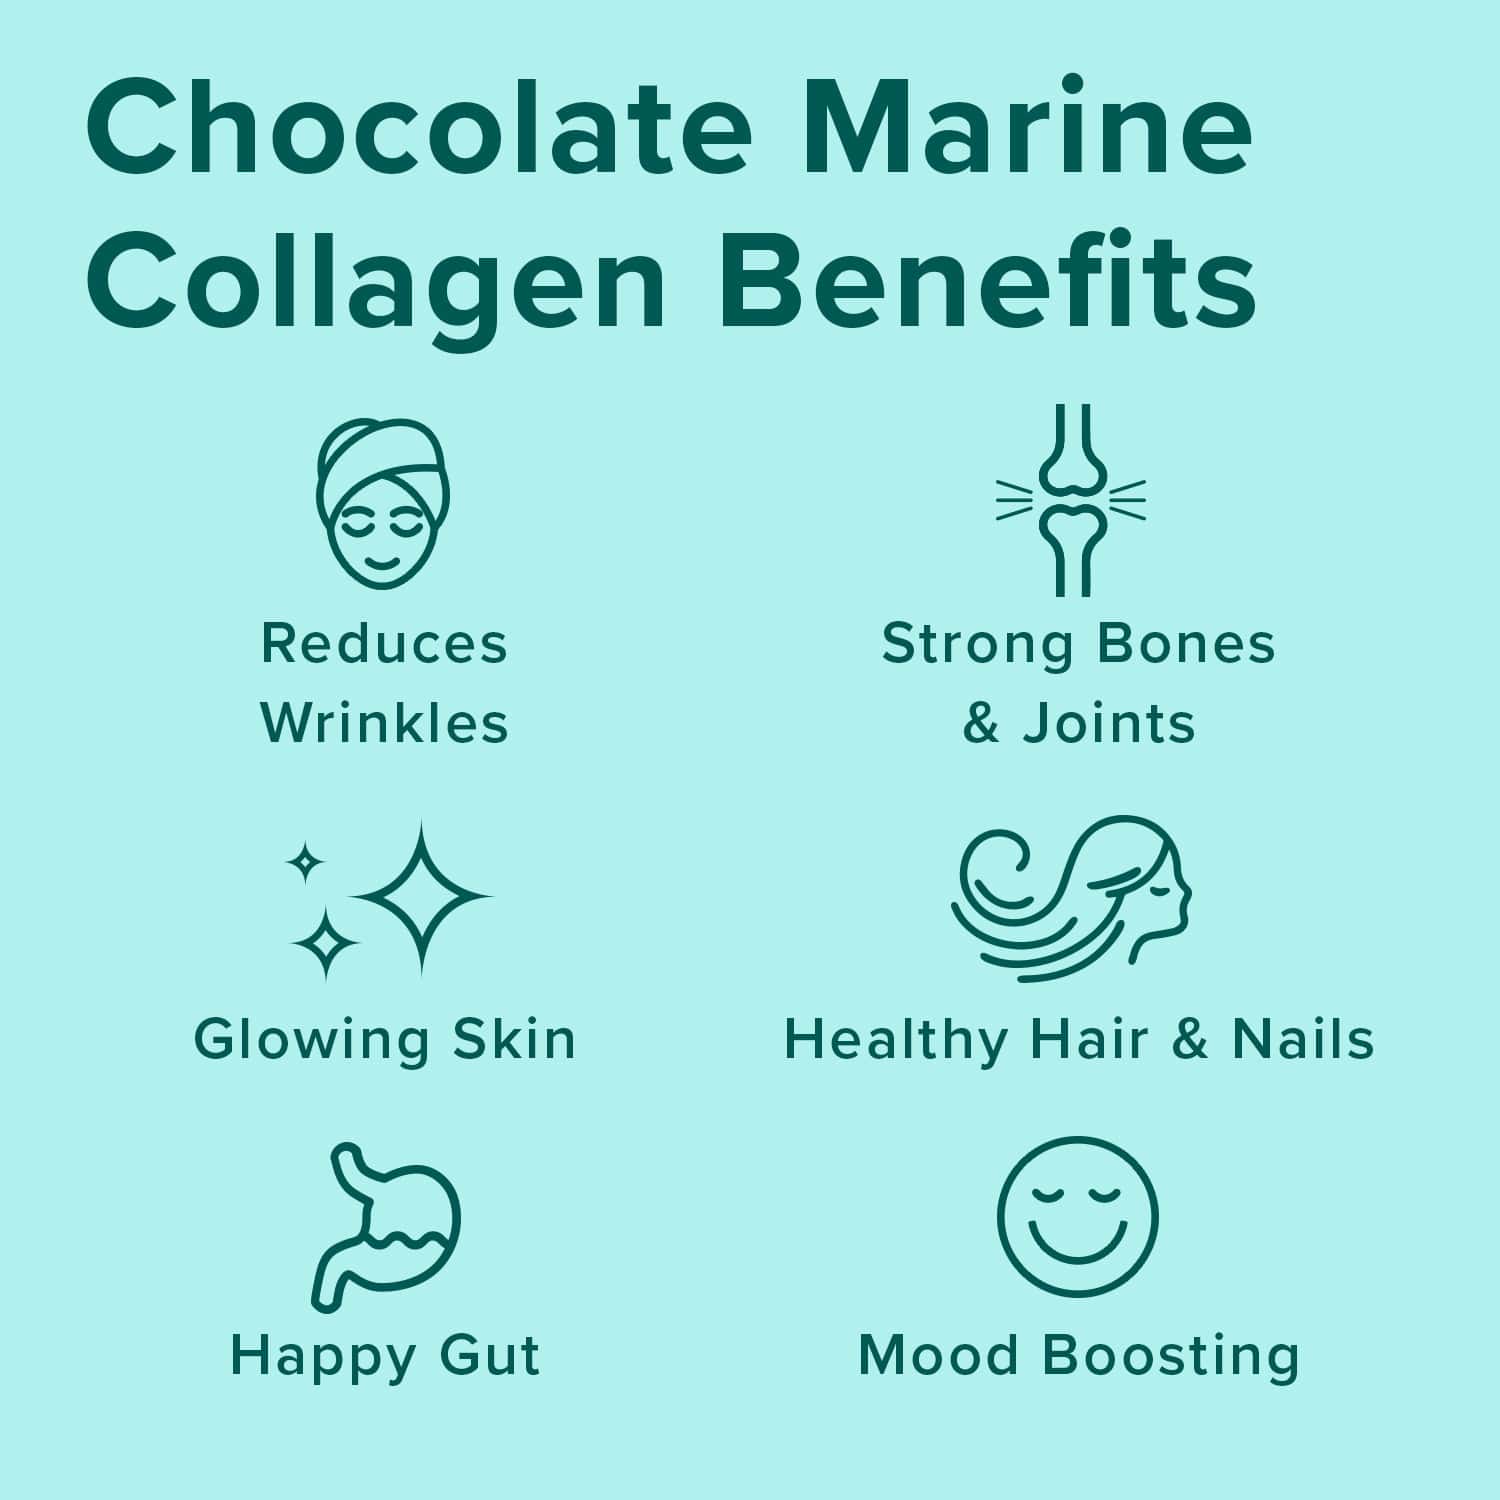 Further Food Chocolate Marine Collagen Benefits: Reduces Wrinkles, Strong Bones and Joints, Glowing Skin, Healthy Hair and Nails, Happy Gut and Mood Boosting